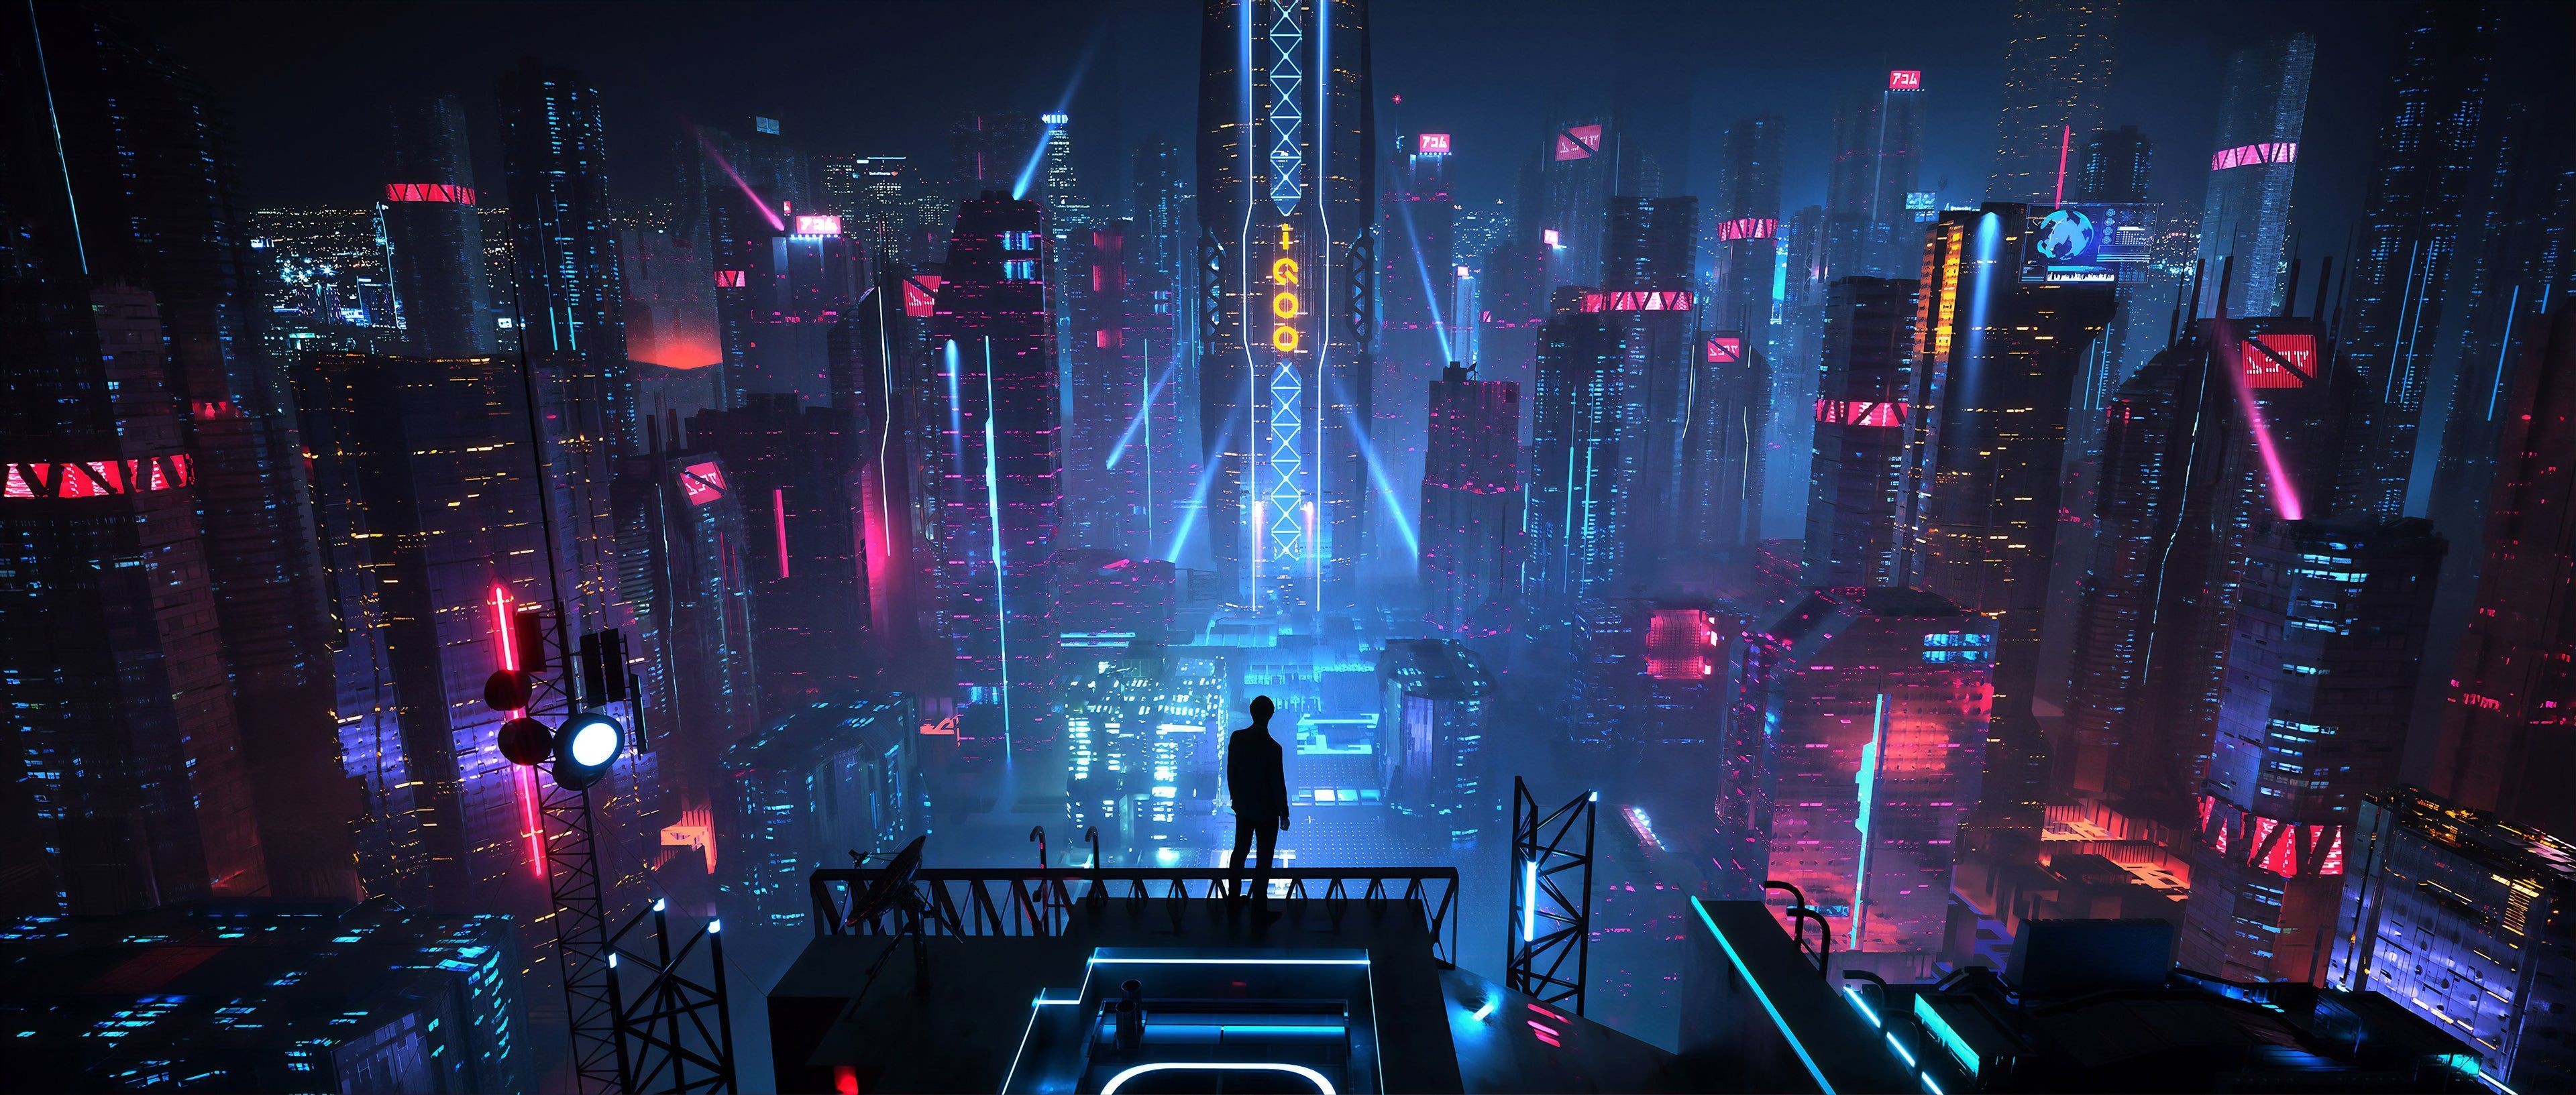 A person standing on a rooftop looking at a neon lit cyberpunk city - Cyberpunk